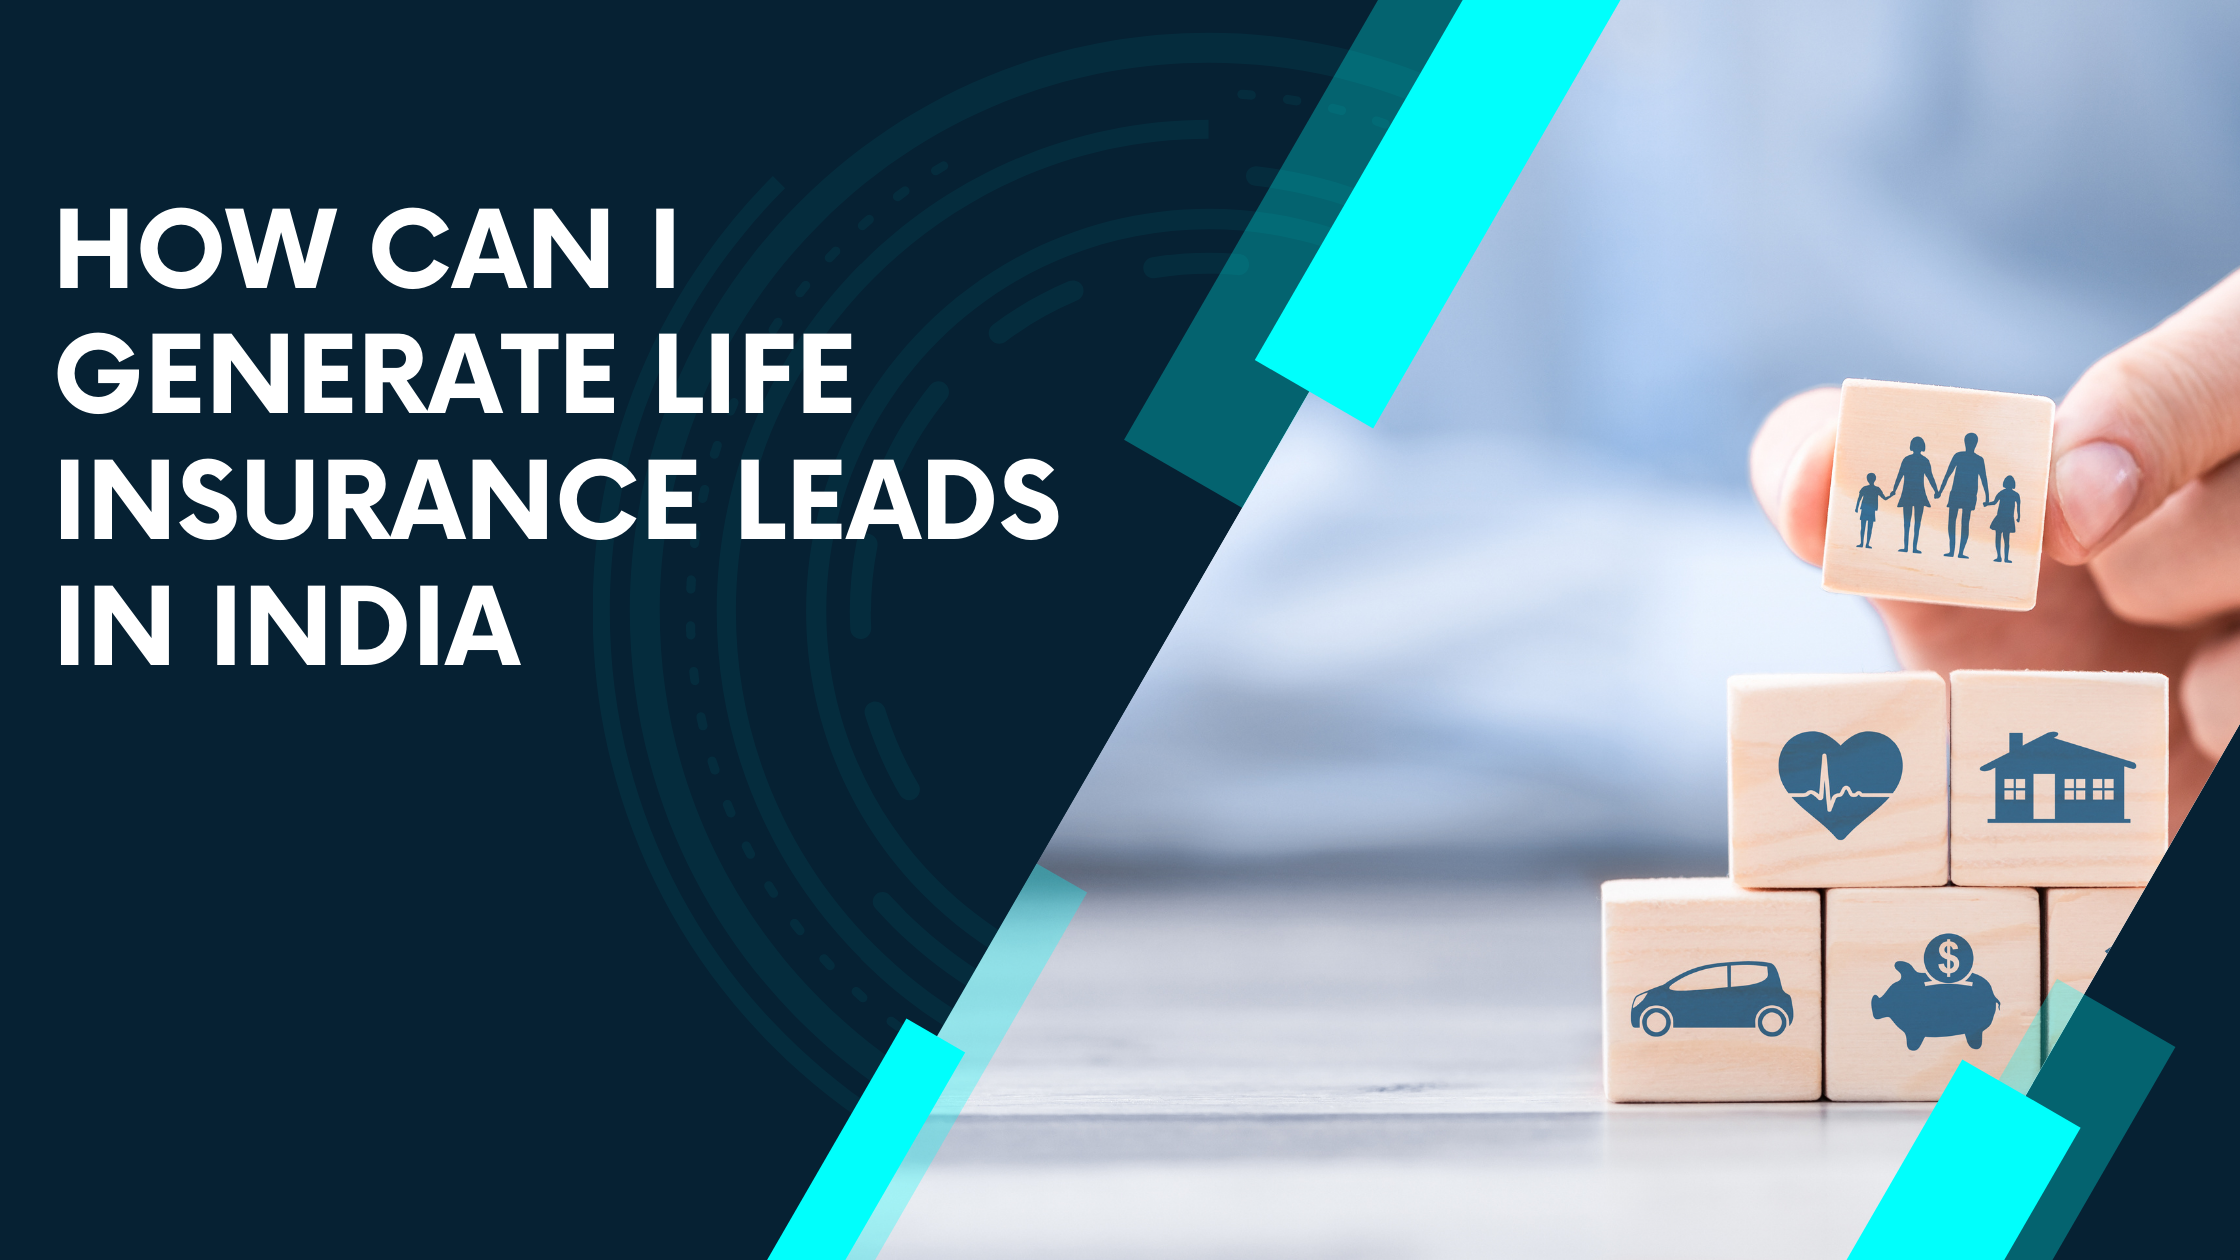 How can I generate life insurance leads india